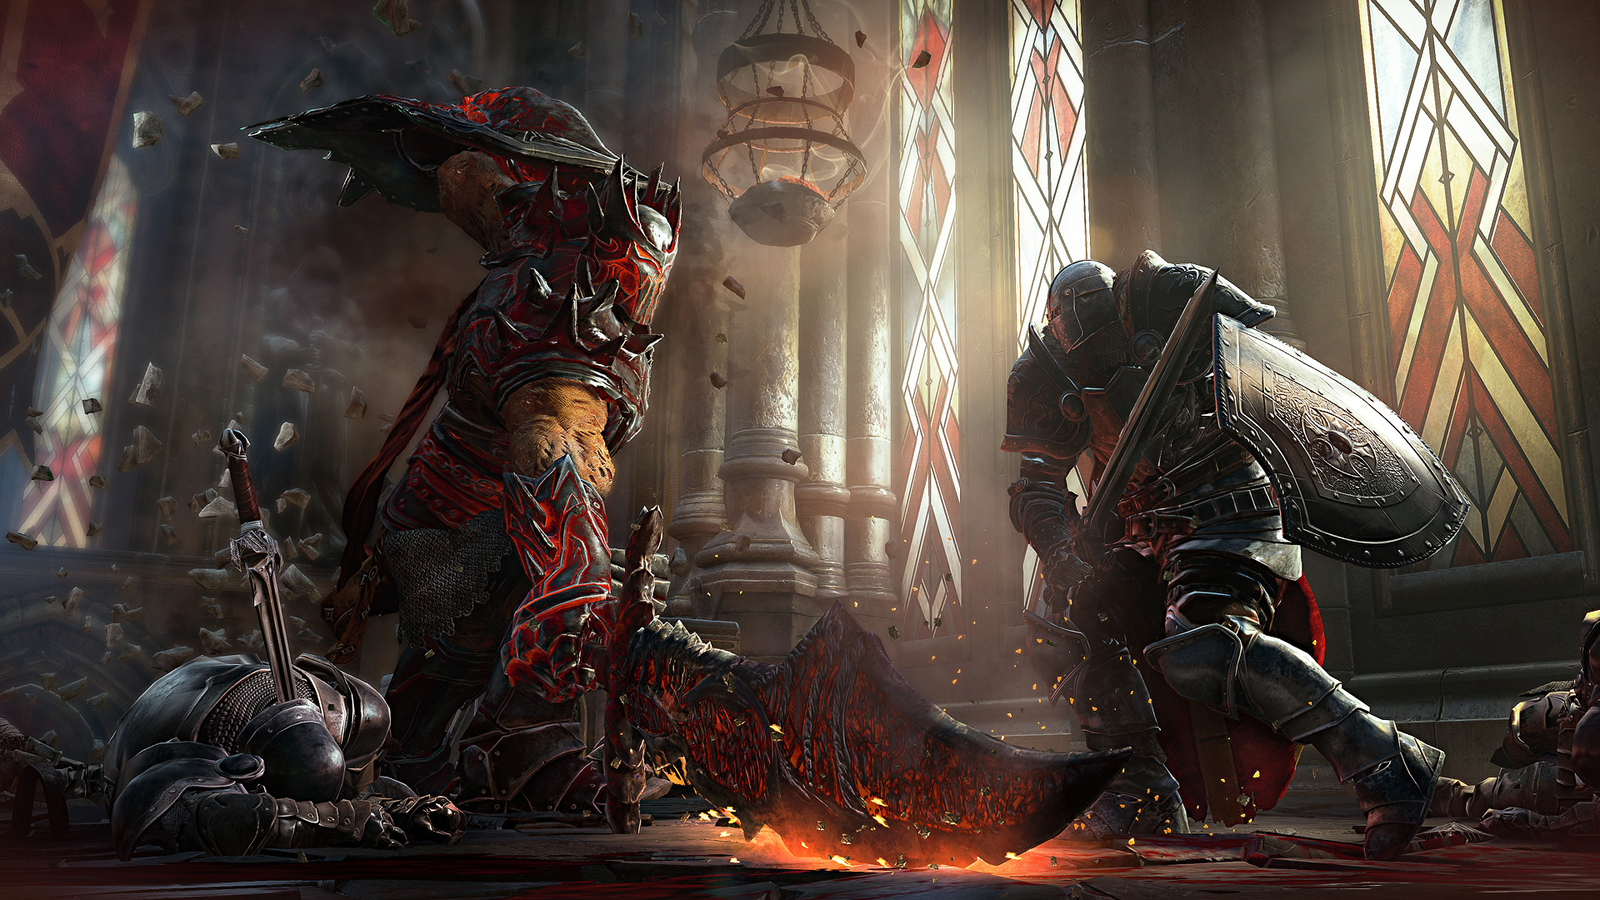 The Lords of the Fallen gameplay trailer revealed at The Game Awards -  Polygon